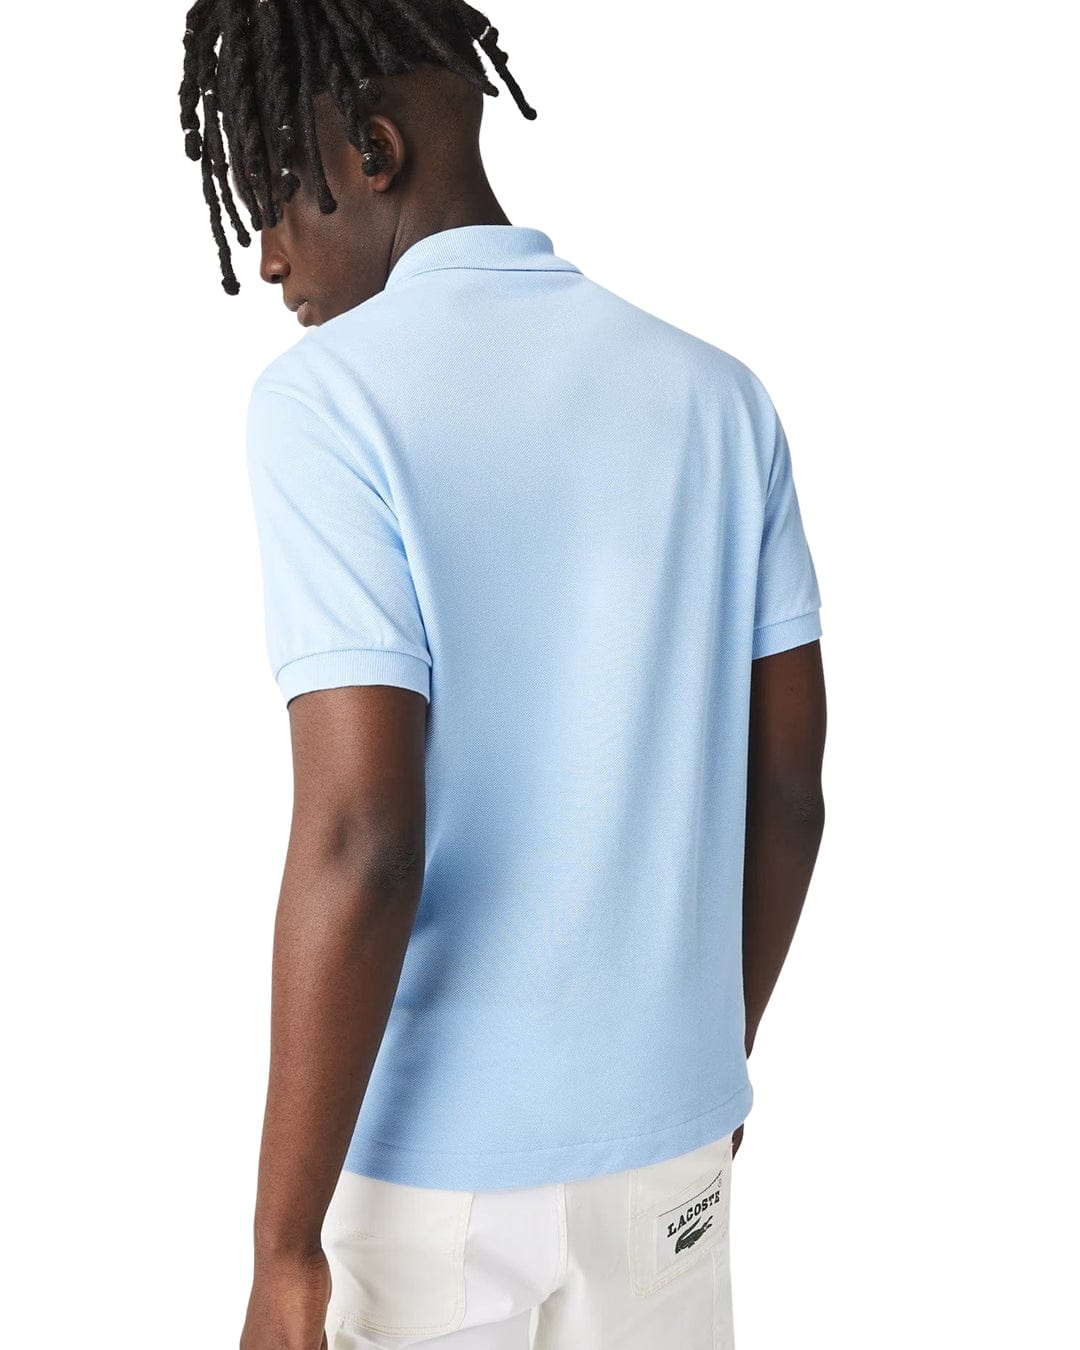 Lacoste Polo Shirts Lacoste Classic Fit Sky Blue Polo Shirt